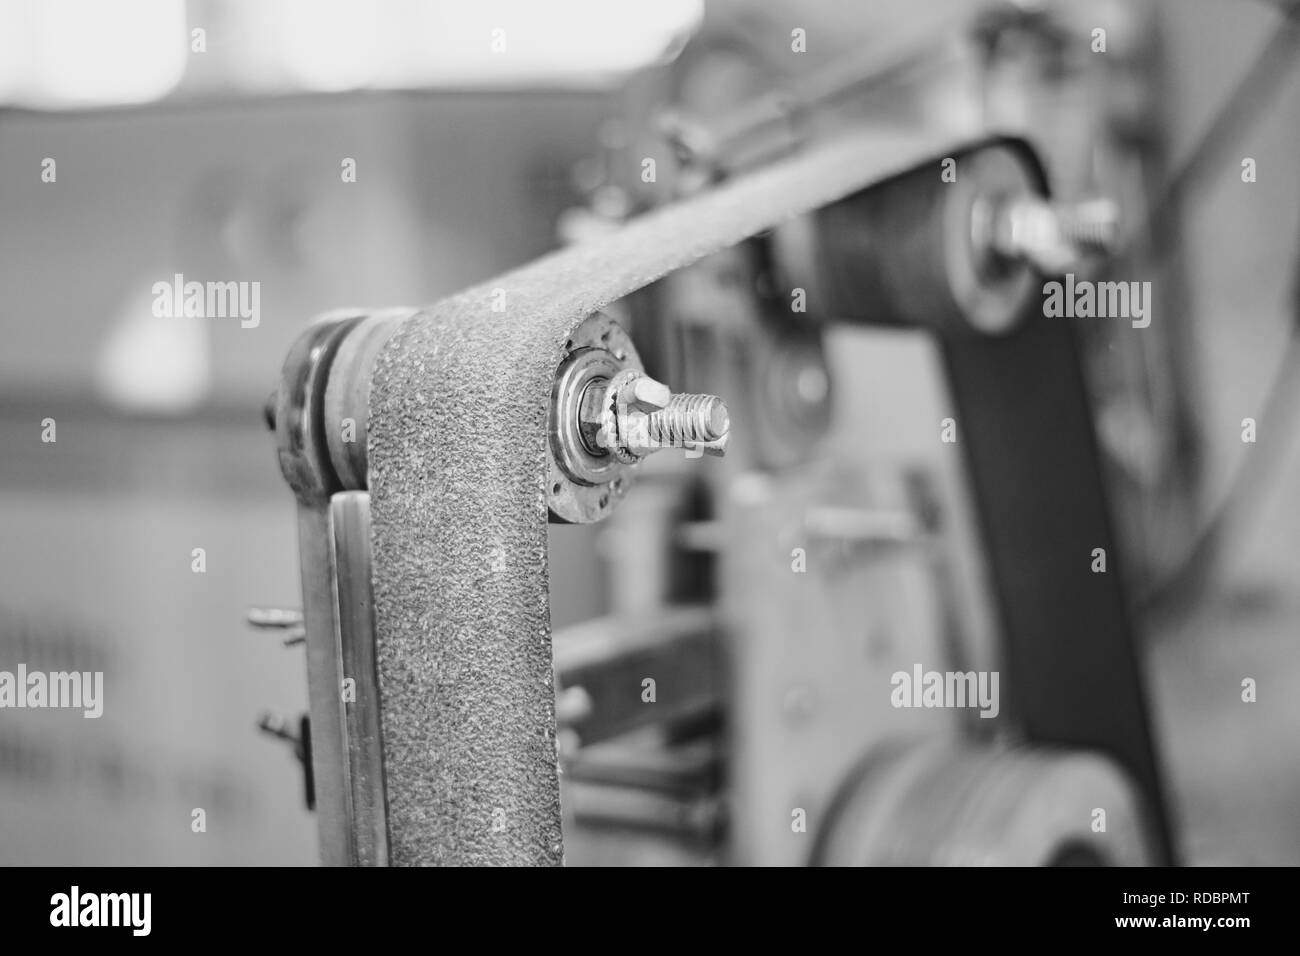 Old grinding machine and wheel in workshop or small factory blur background Stock Photo